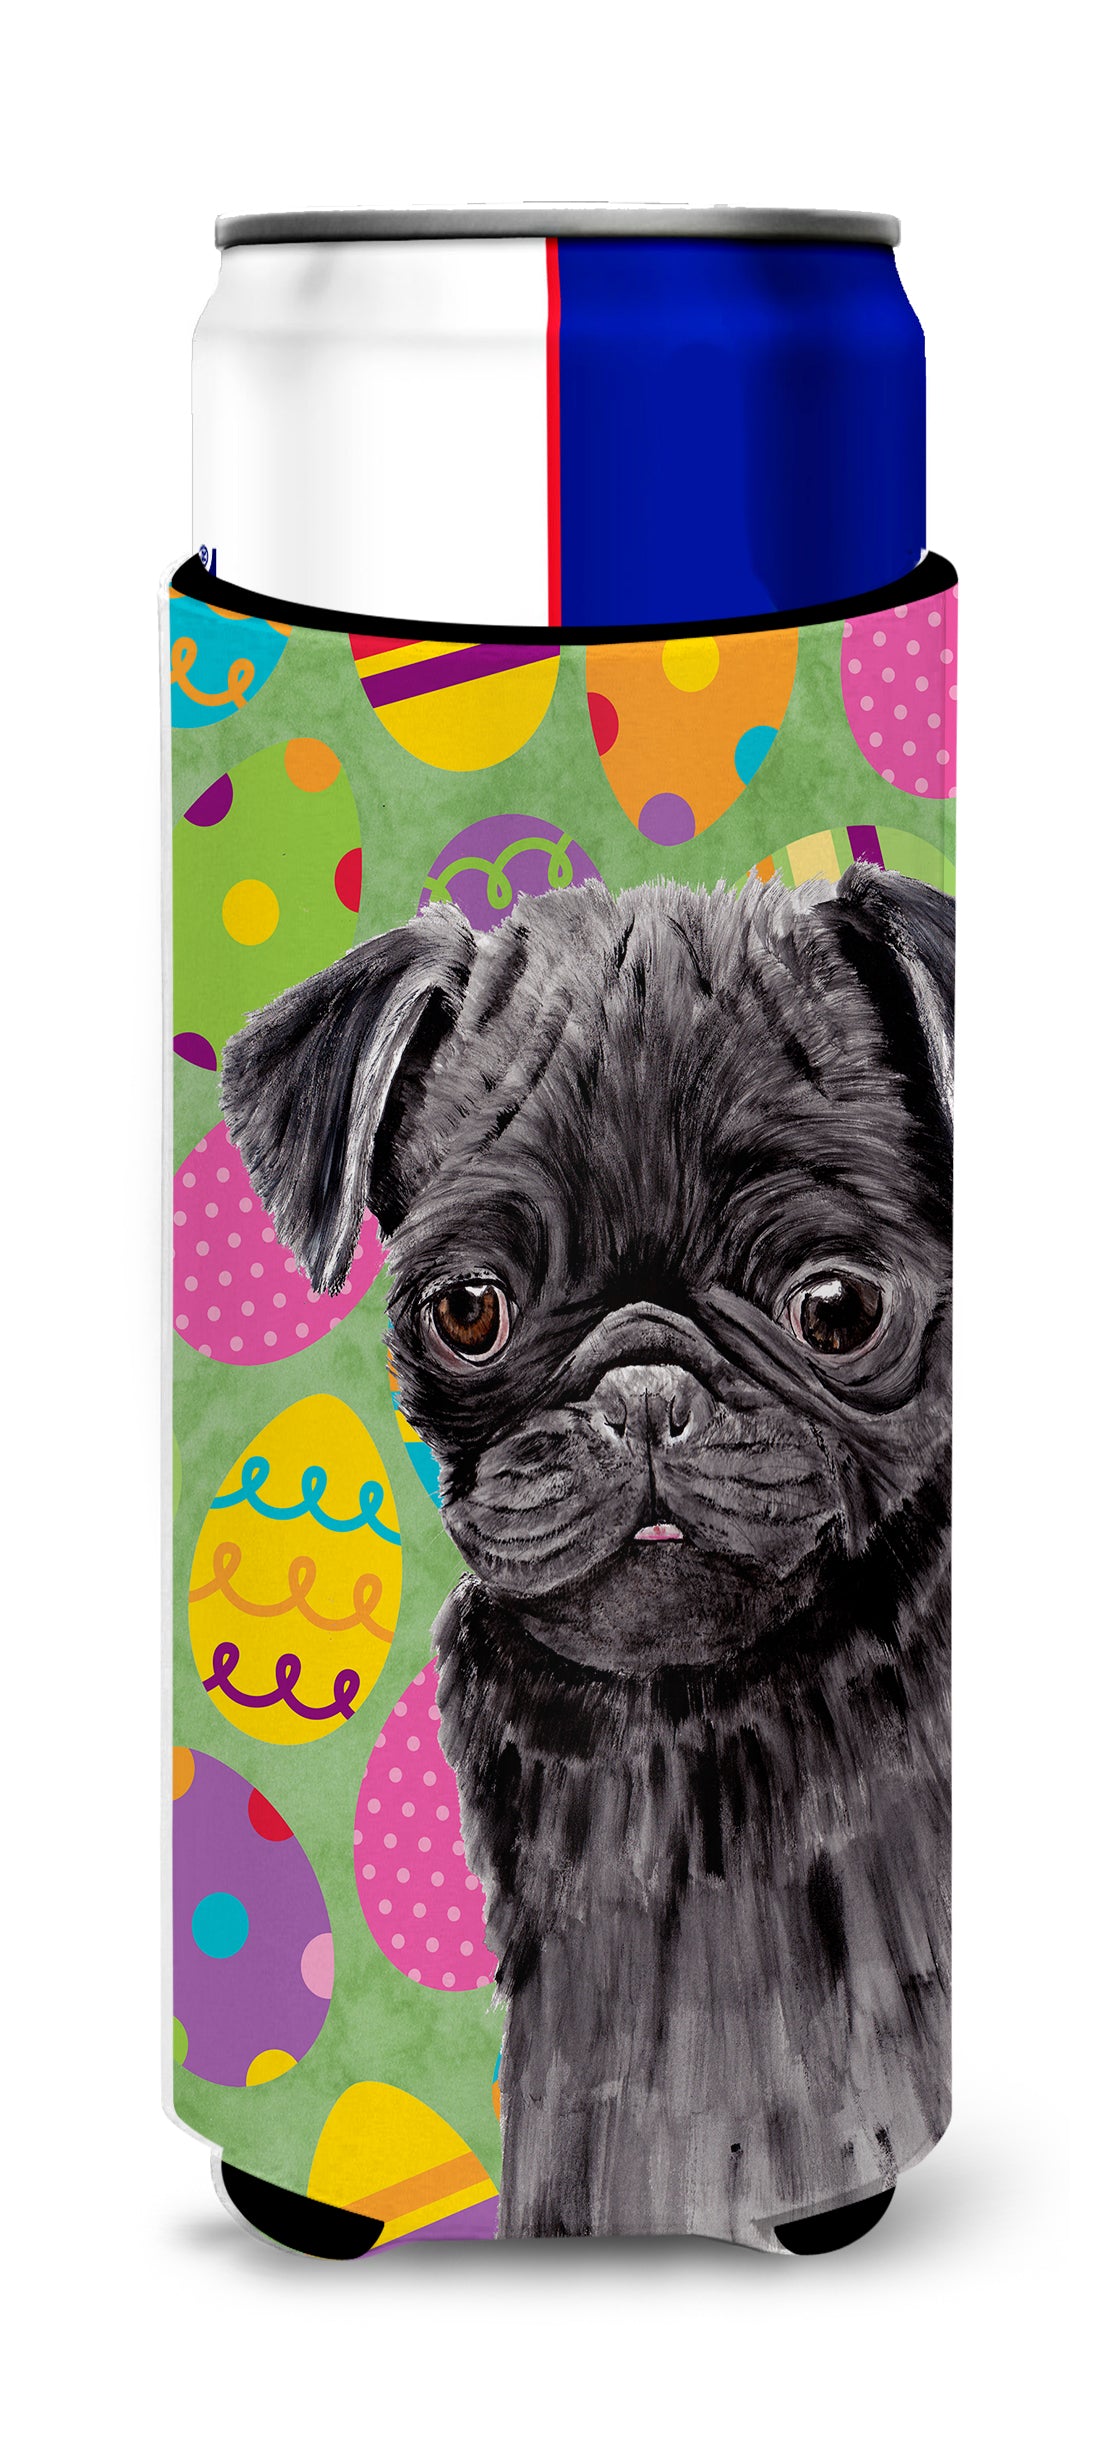 Pug Easter Eggtravaganza Ultra Beverage Insulators for slim cans SC9446MUK.